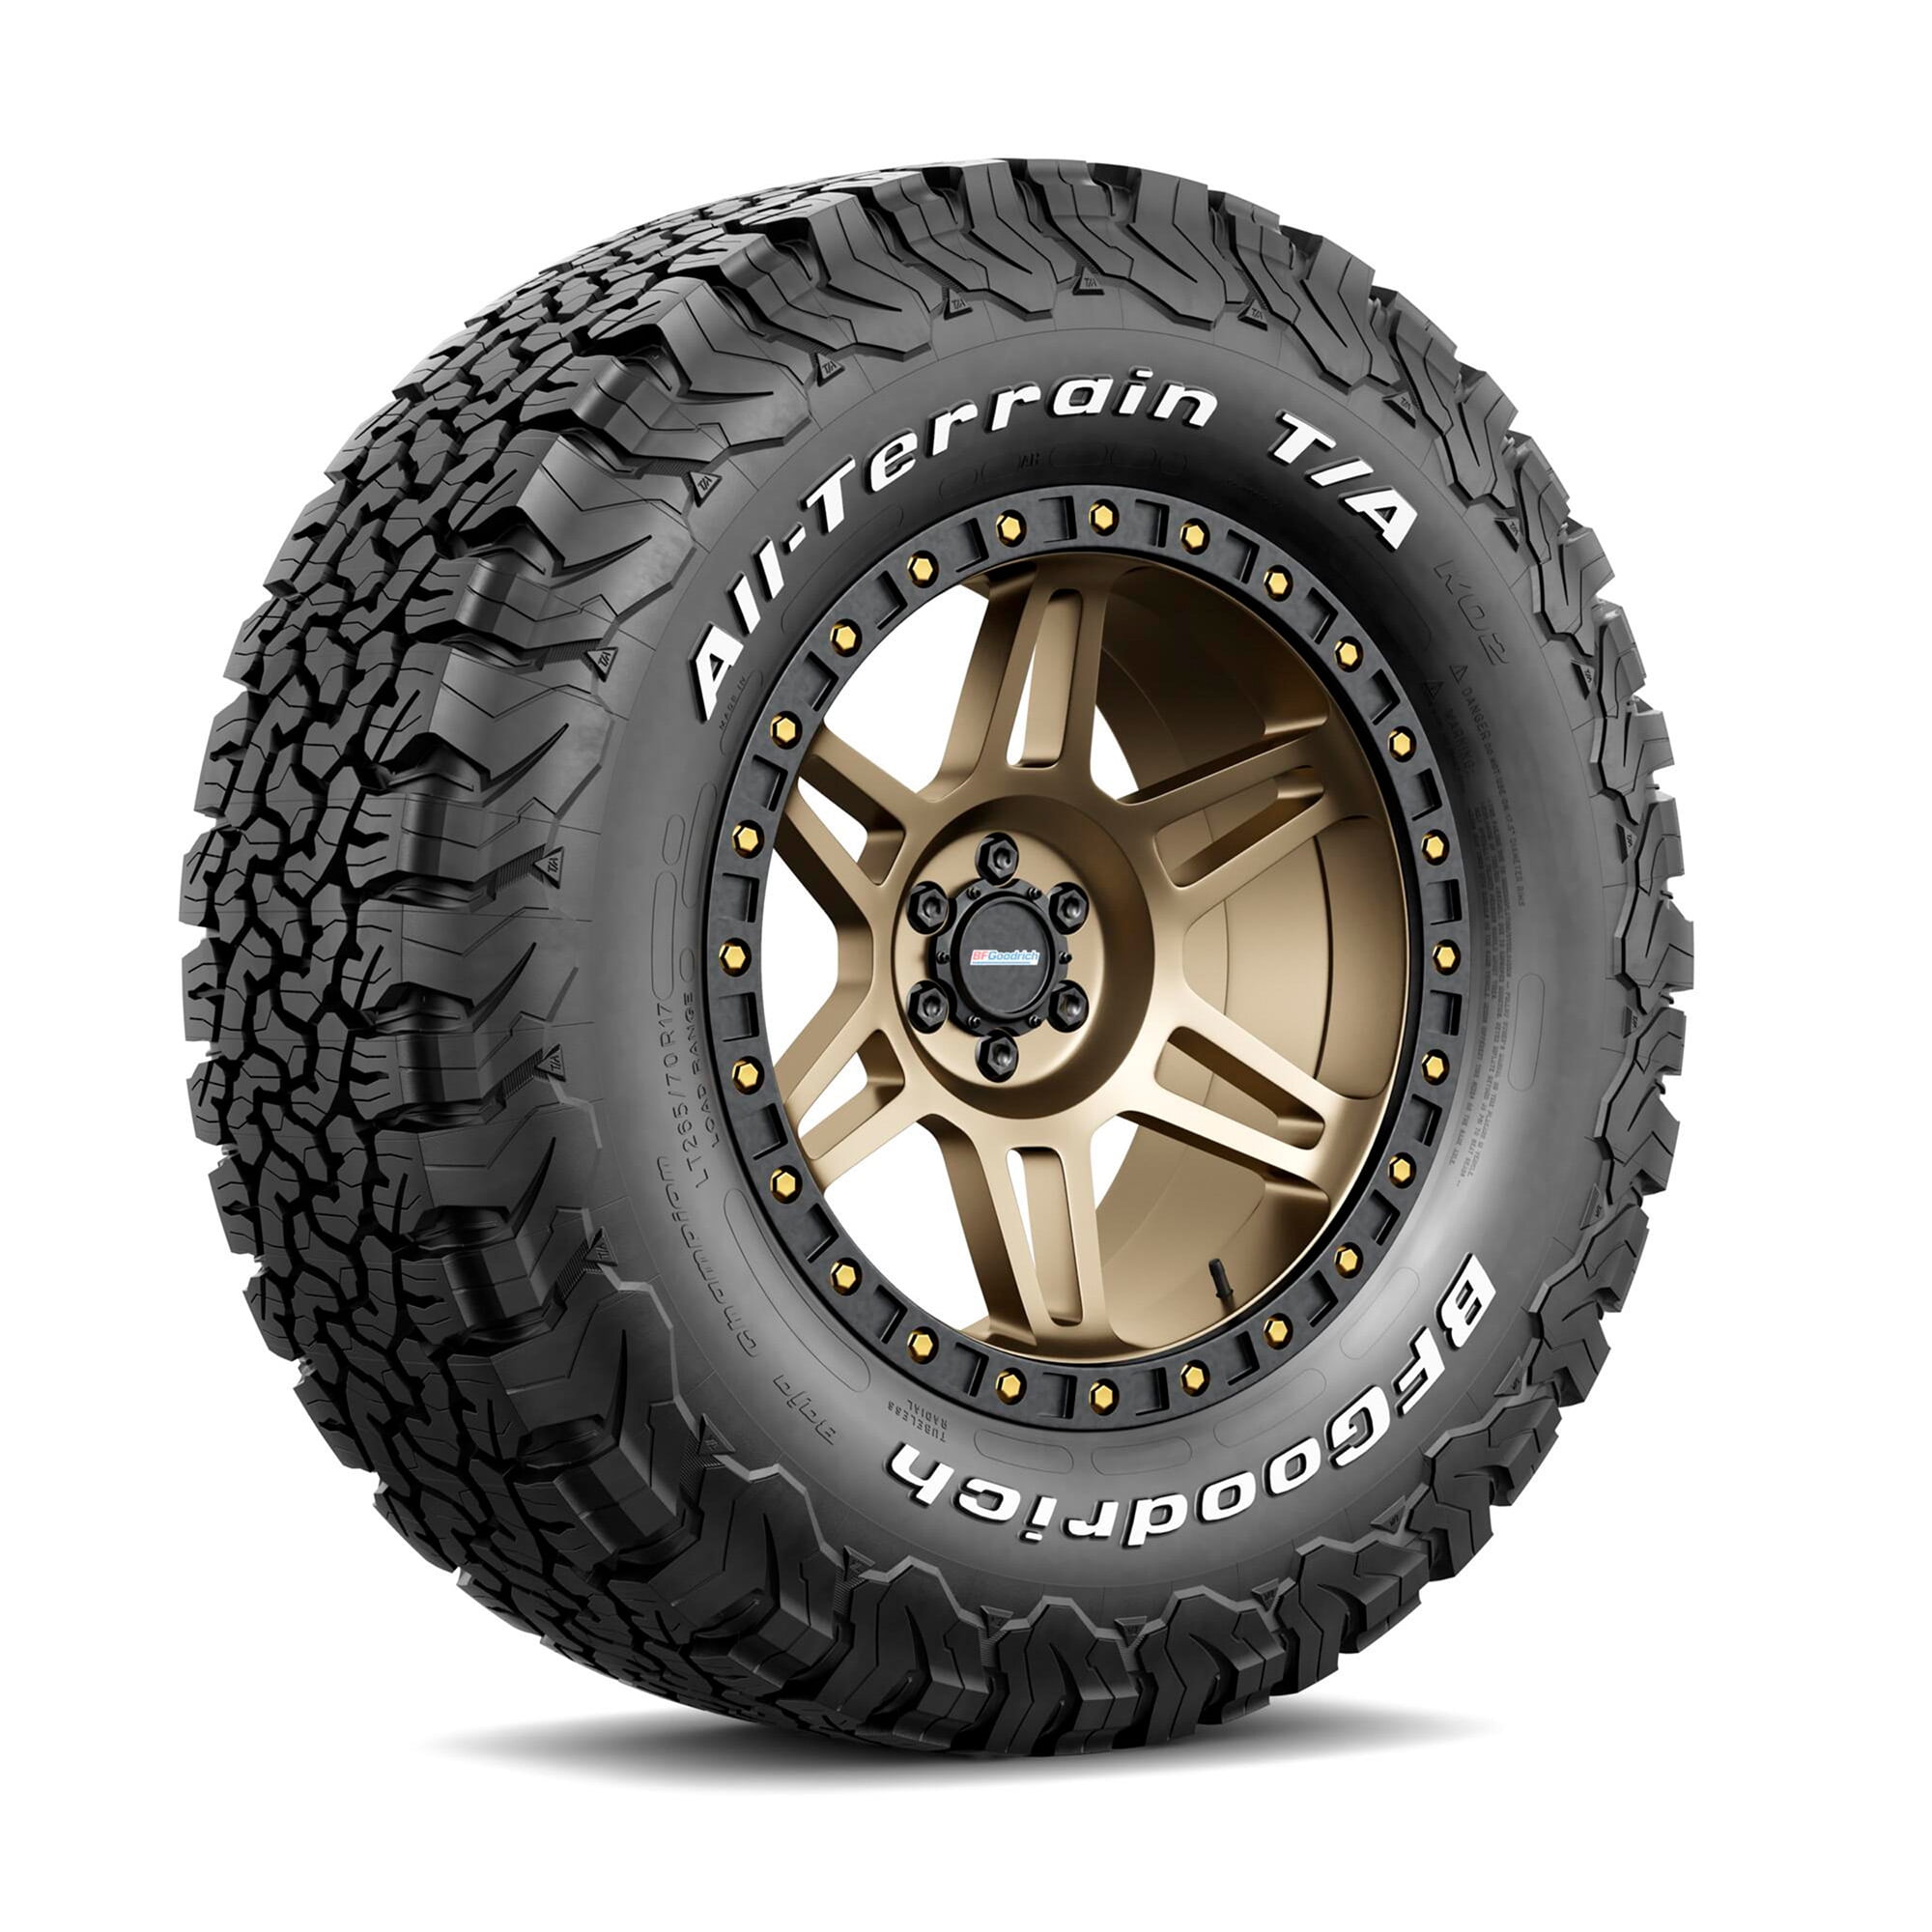 TYRES 235/65R17 ROCK BF KO2 Tread 4x4 Off Road All Terrain AT MT Tyre Offroad 